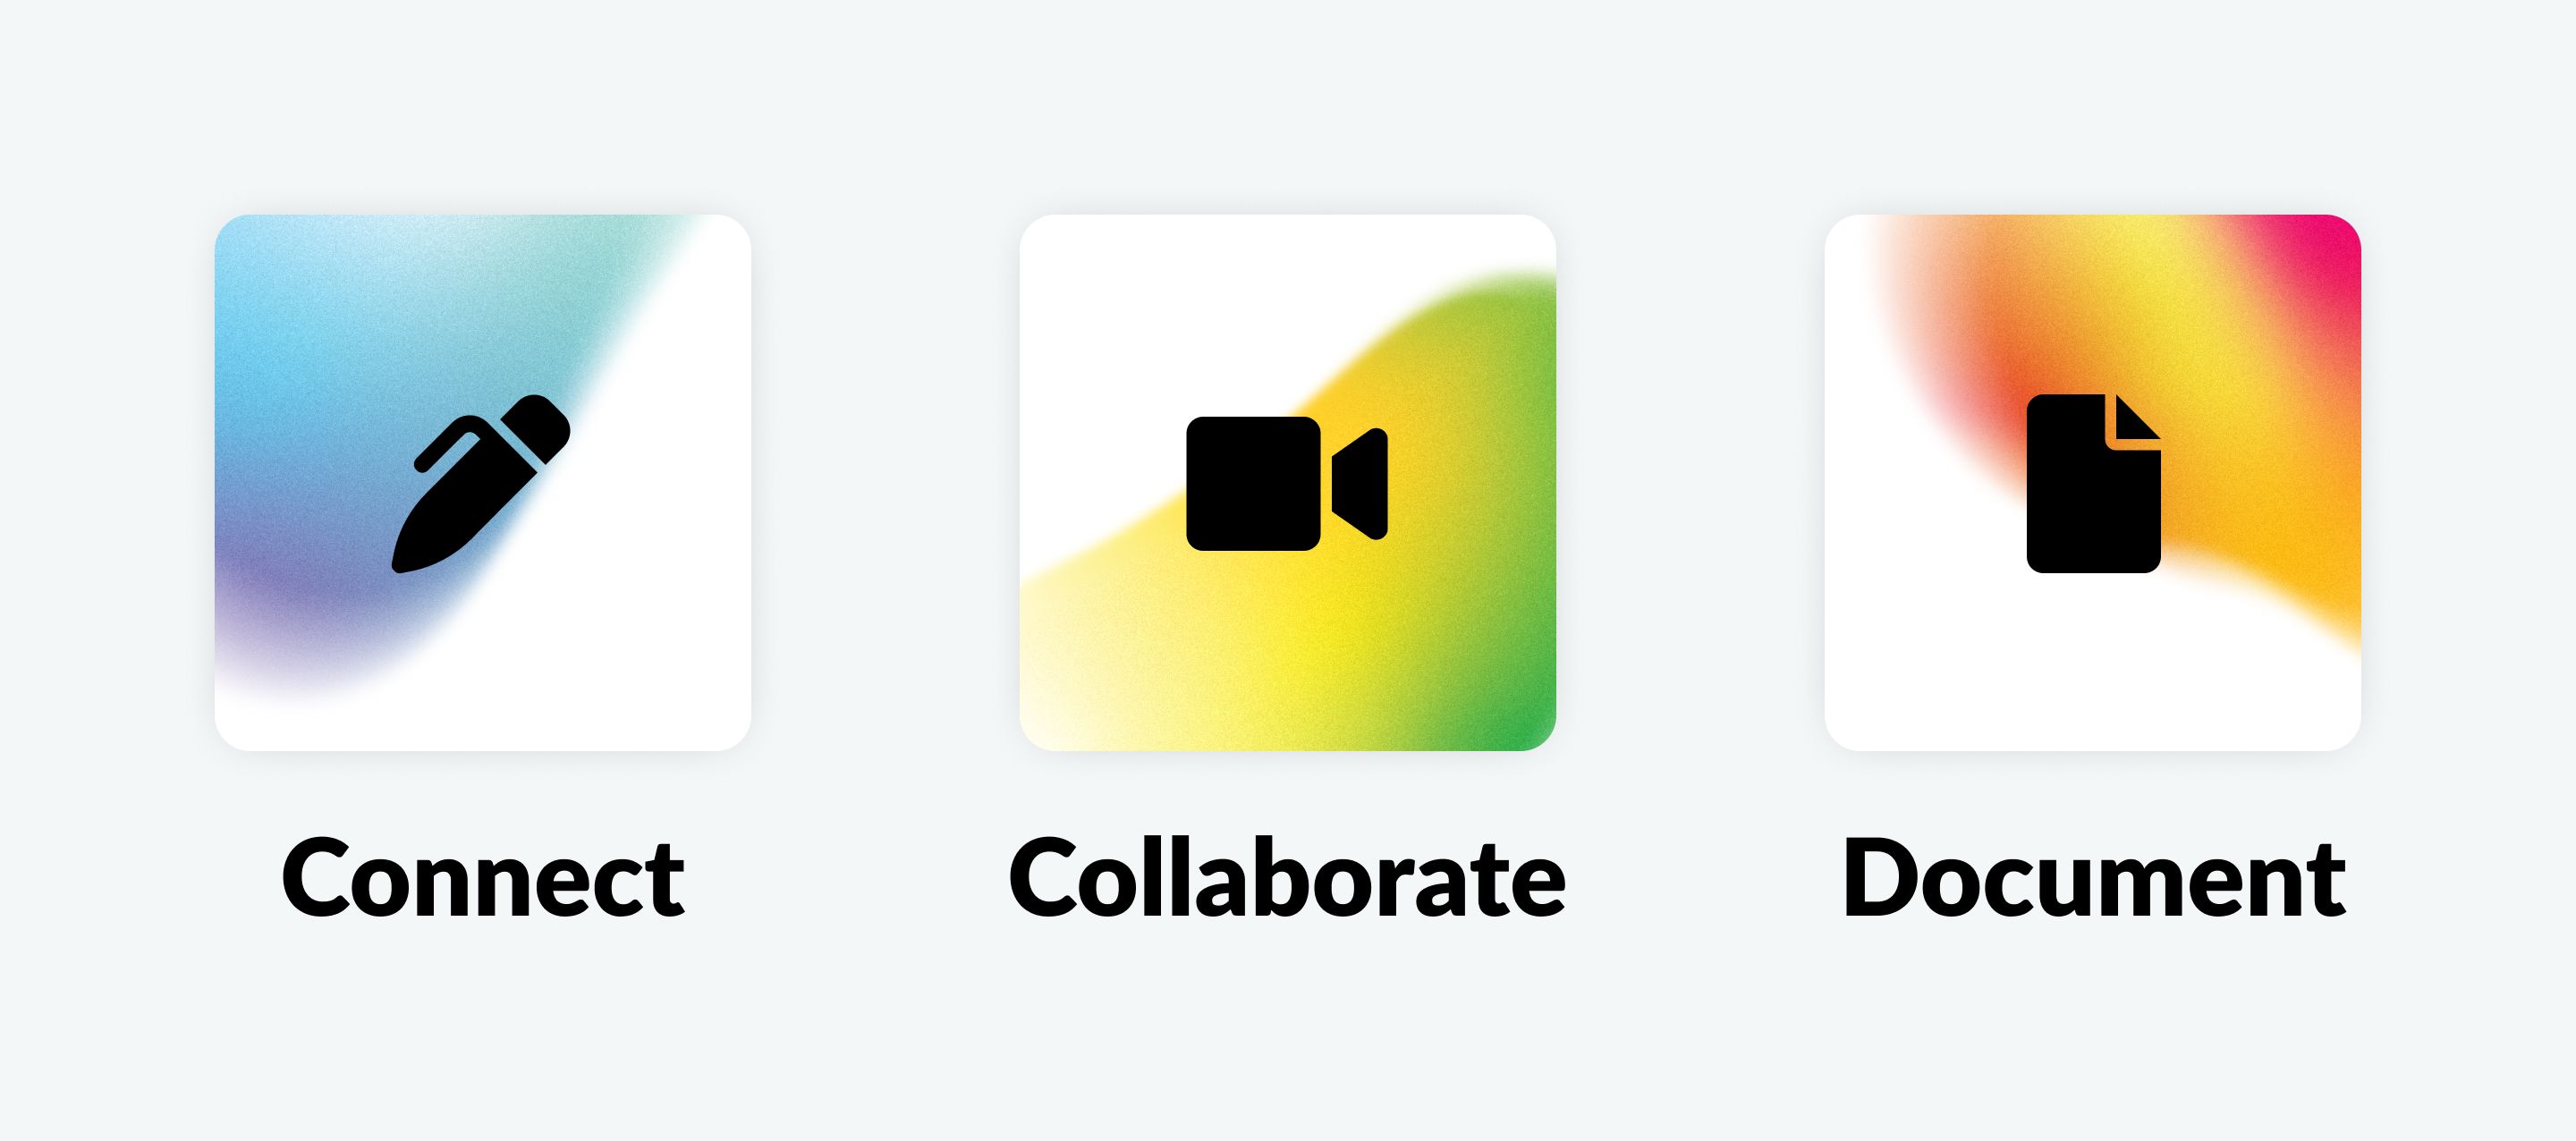 The 3 step workflow of Safar TeleCare: Connect, Collaborate & Document